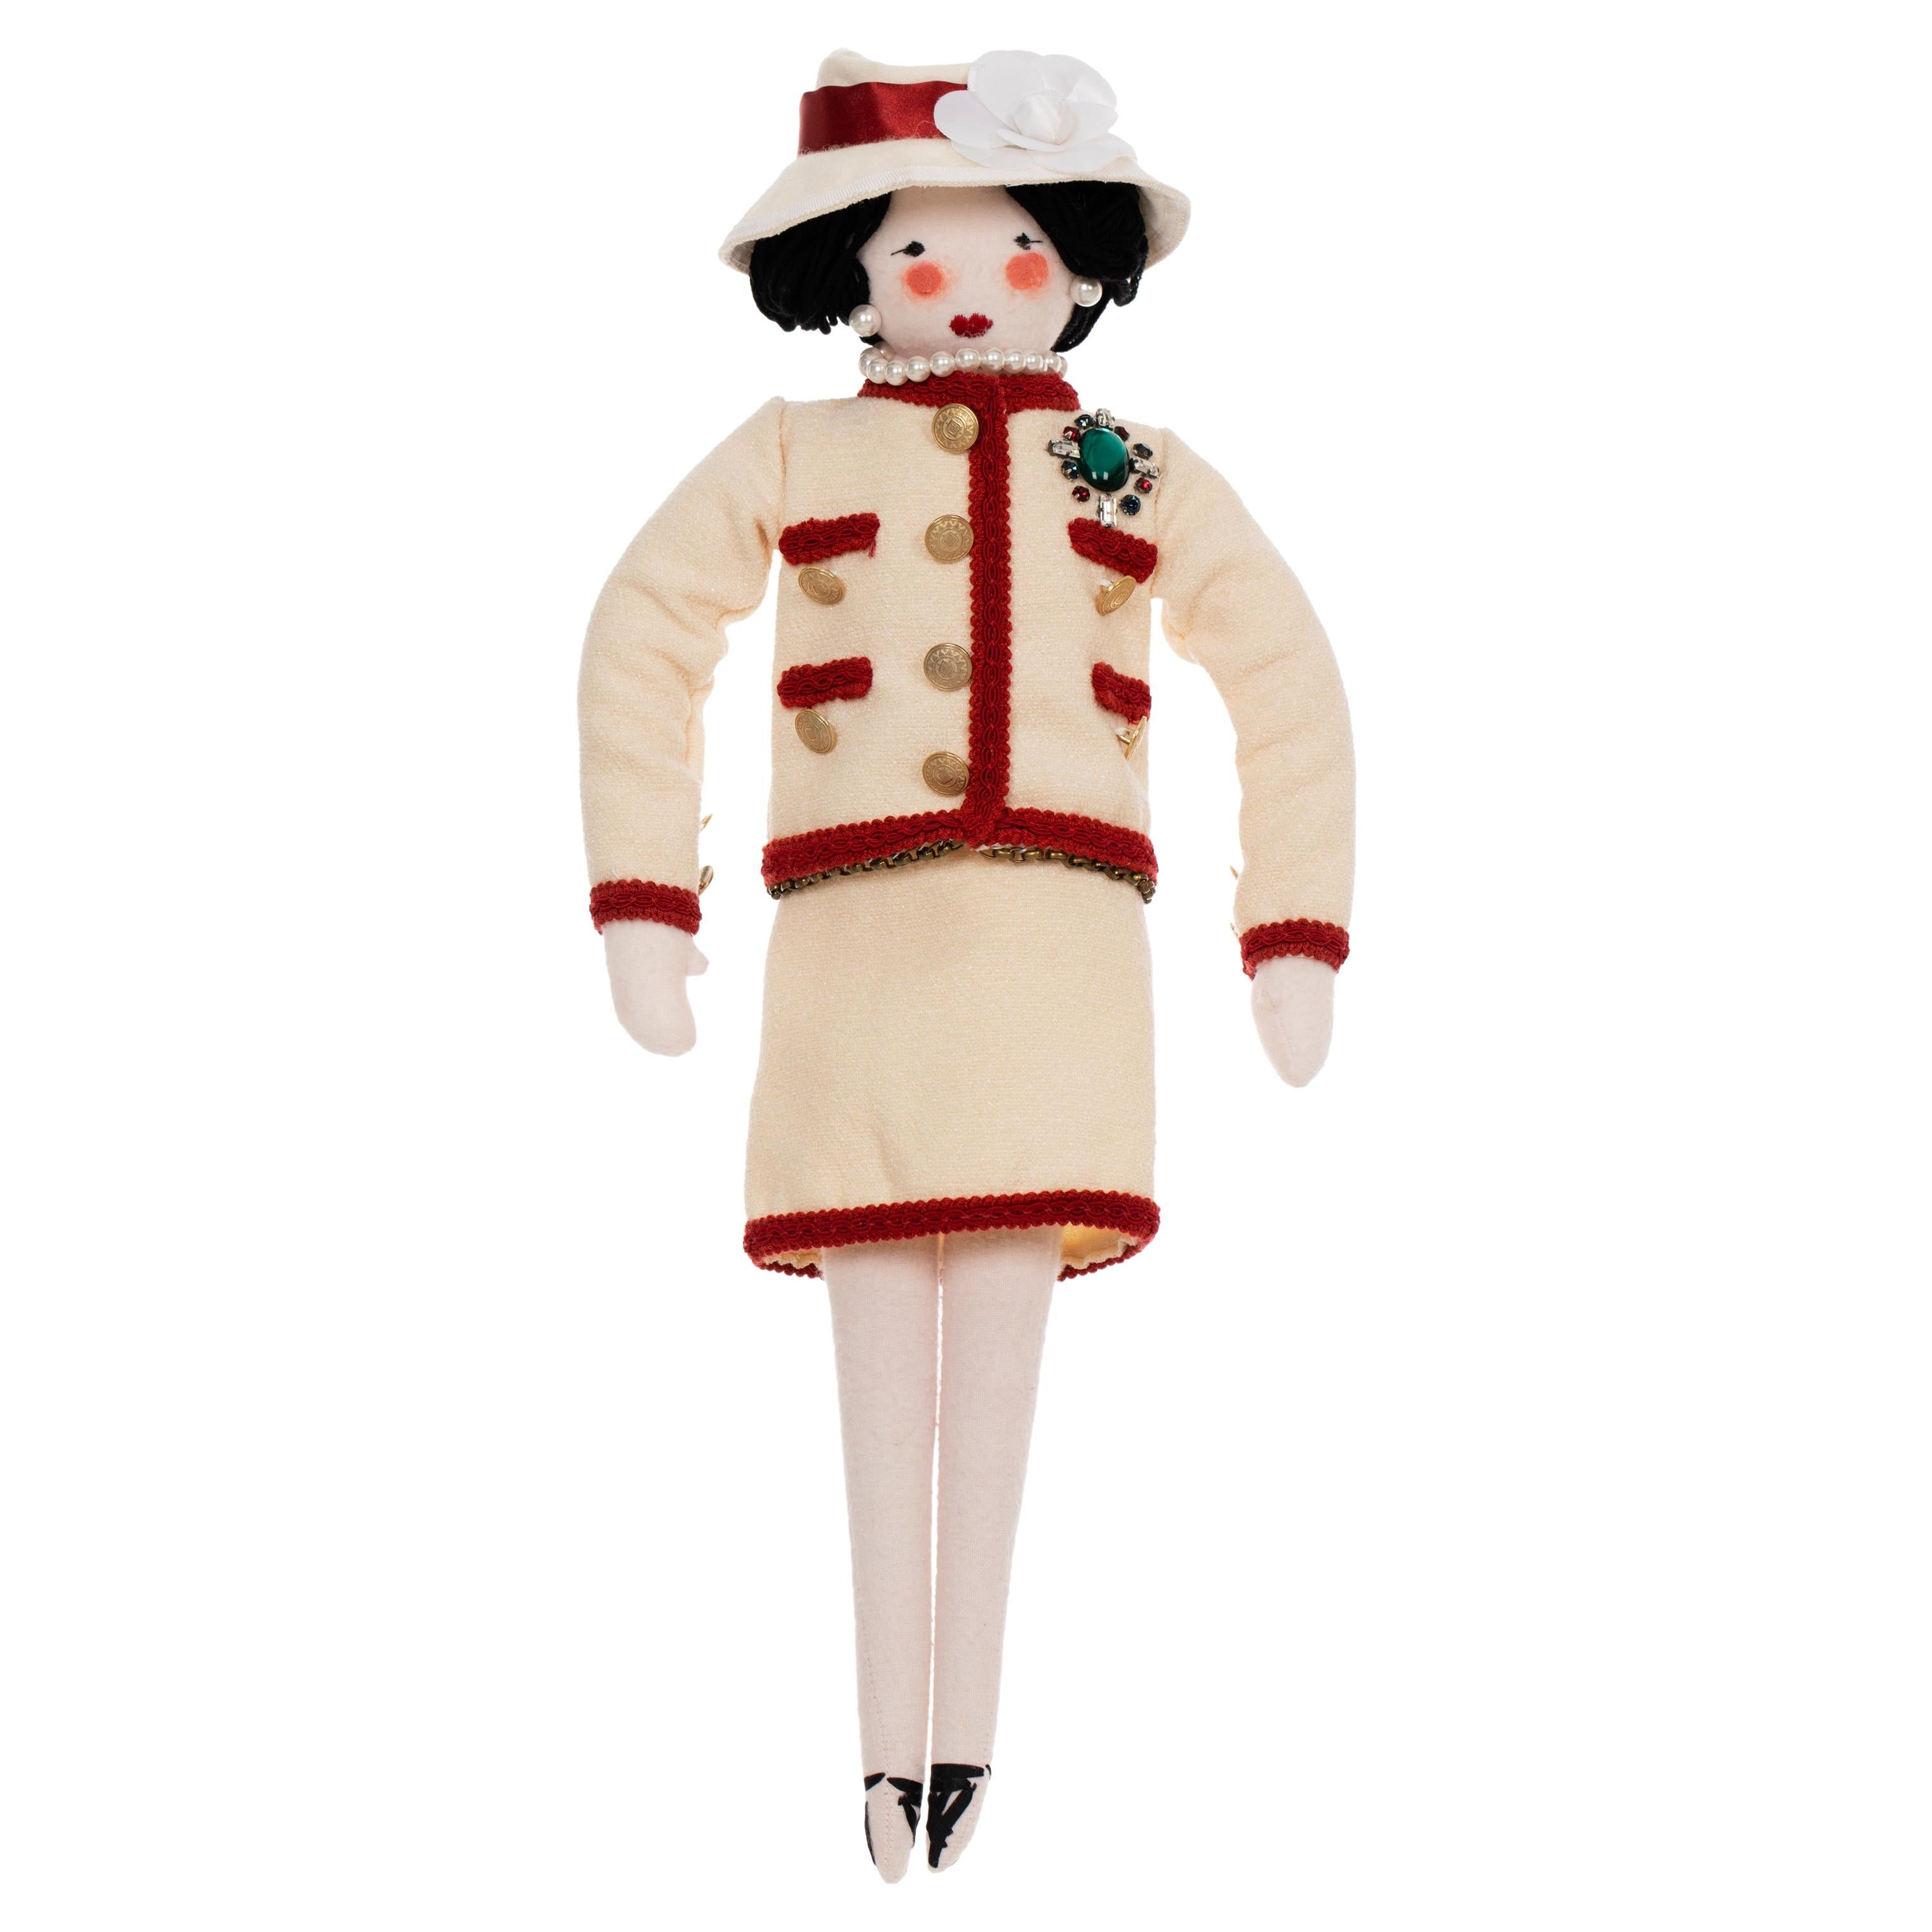 Chanel 2010 Mademoiselle Coco Rag Doll For Sale